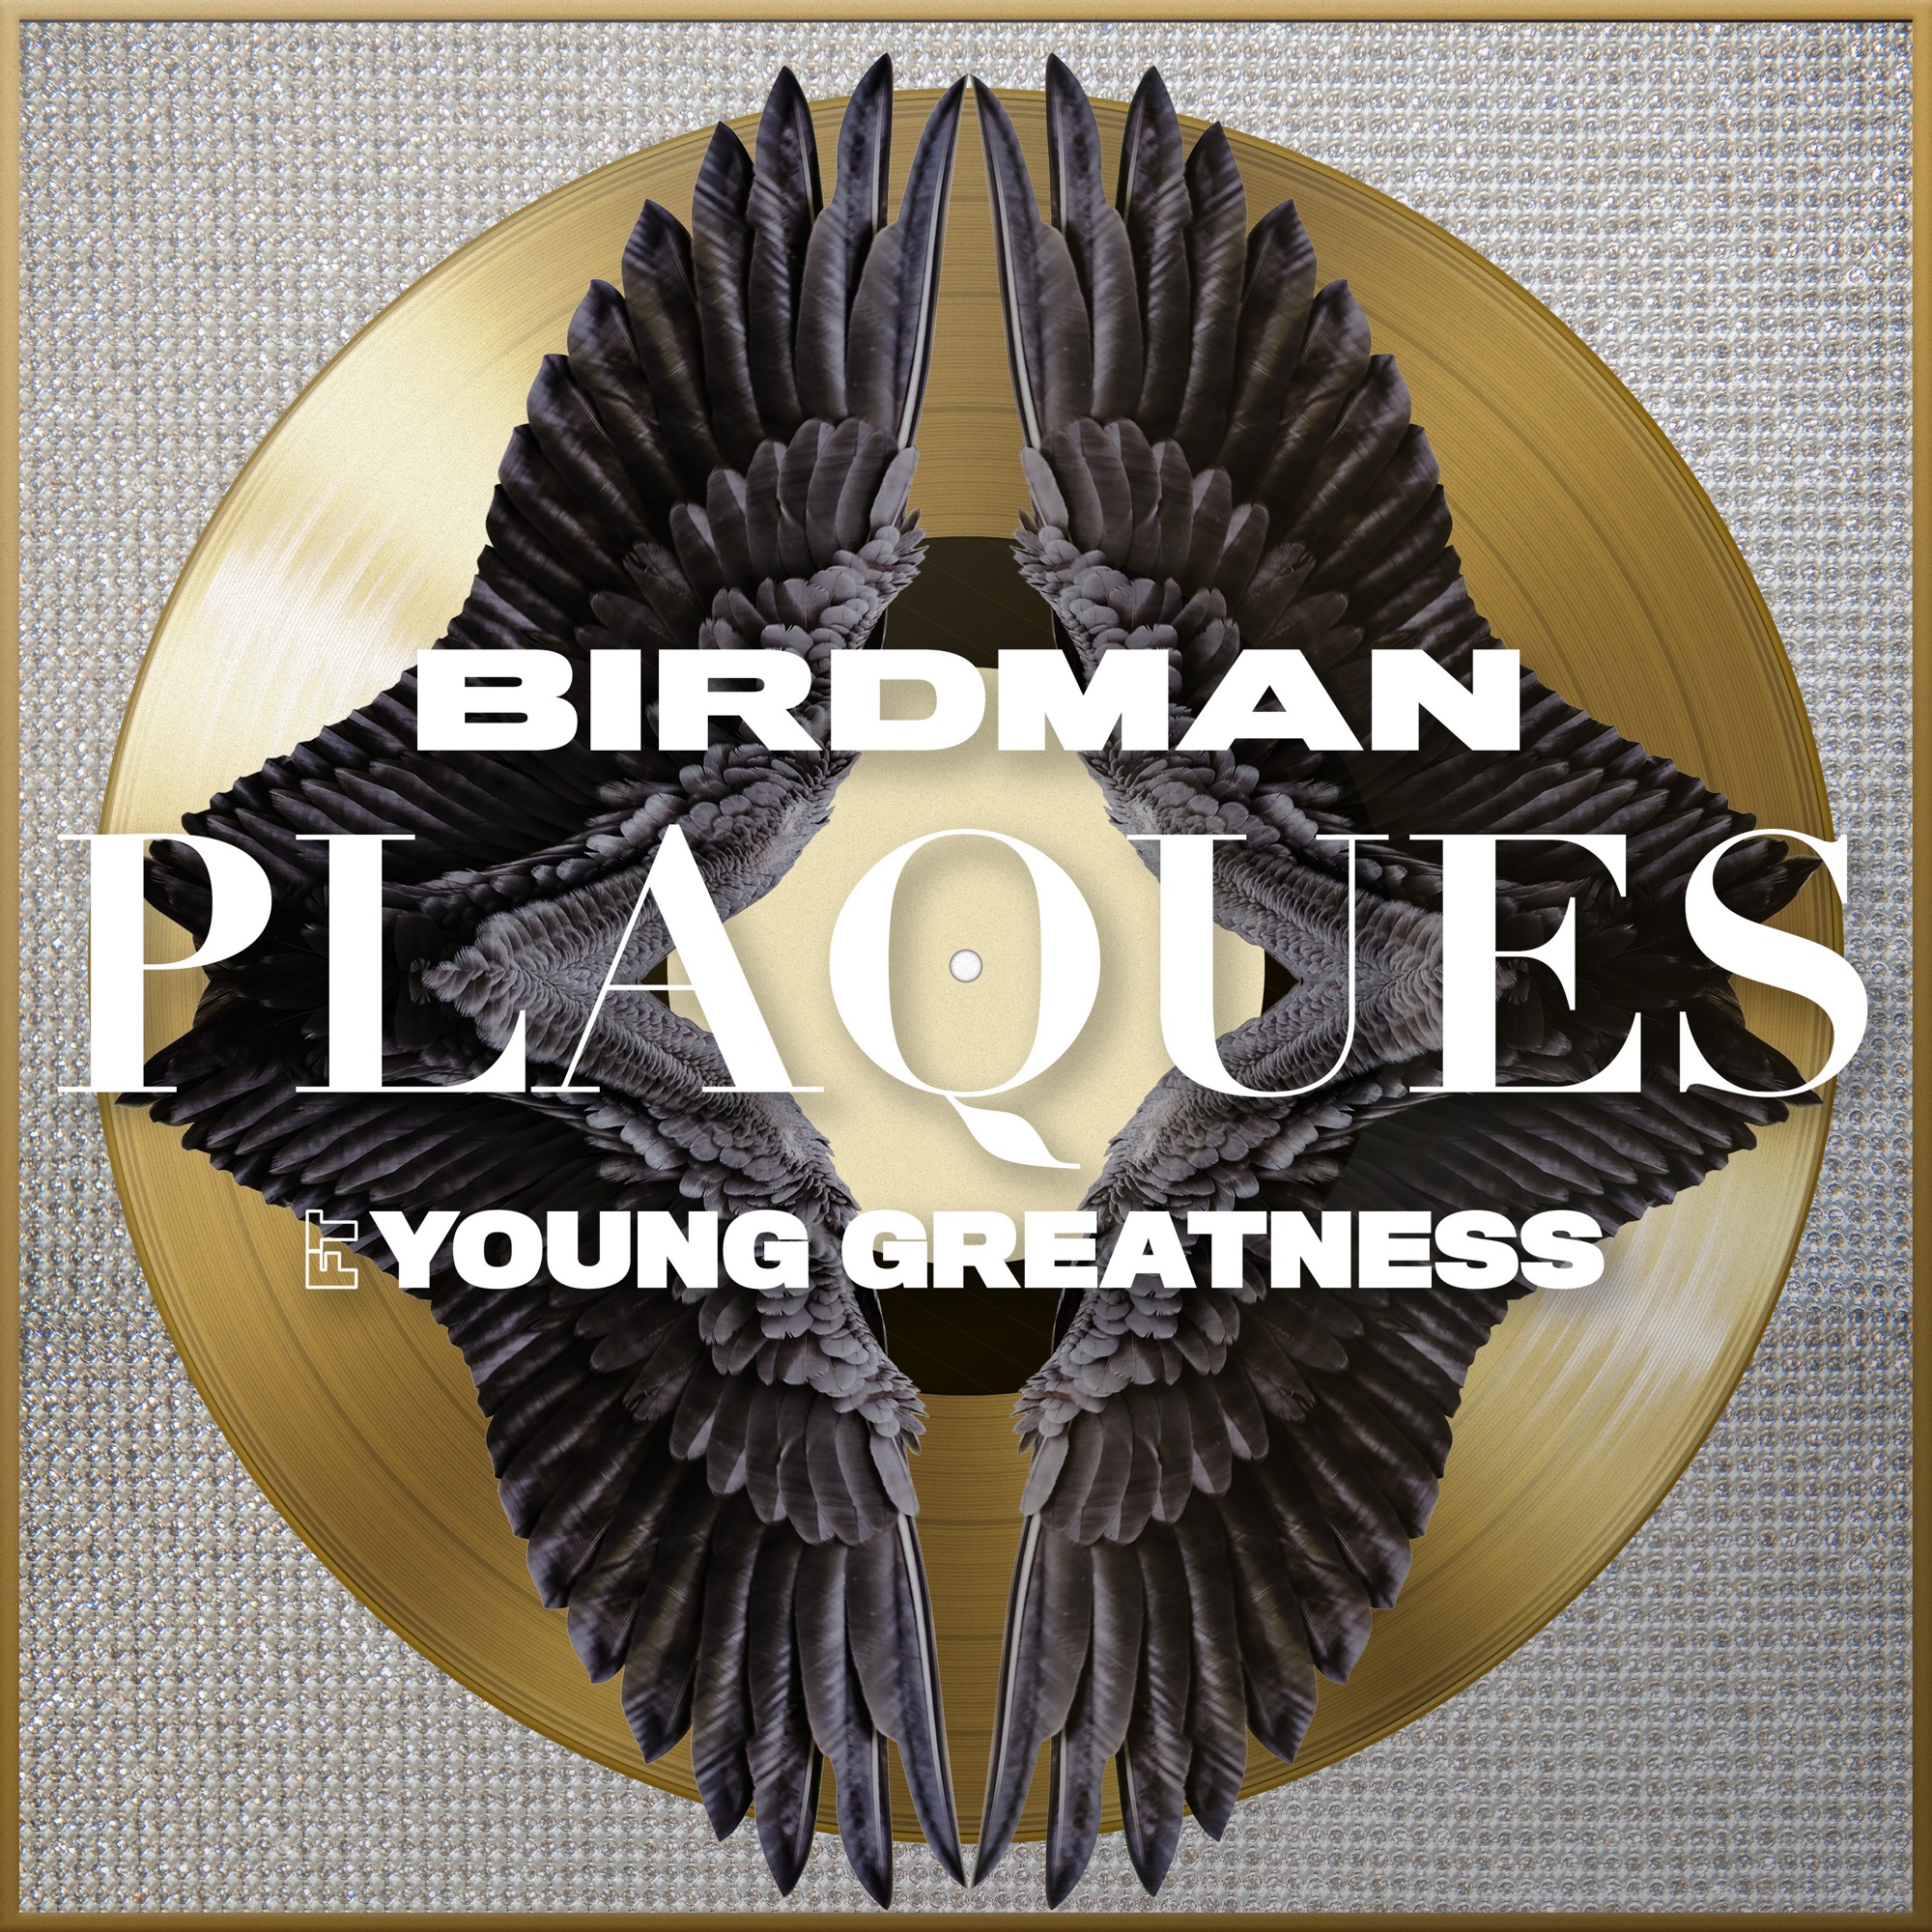 Birdman - Plaques (feat. Young Greatness) - Single